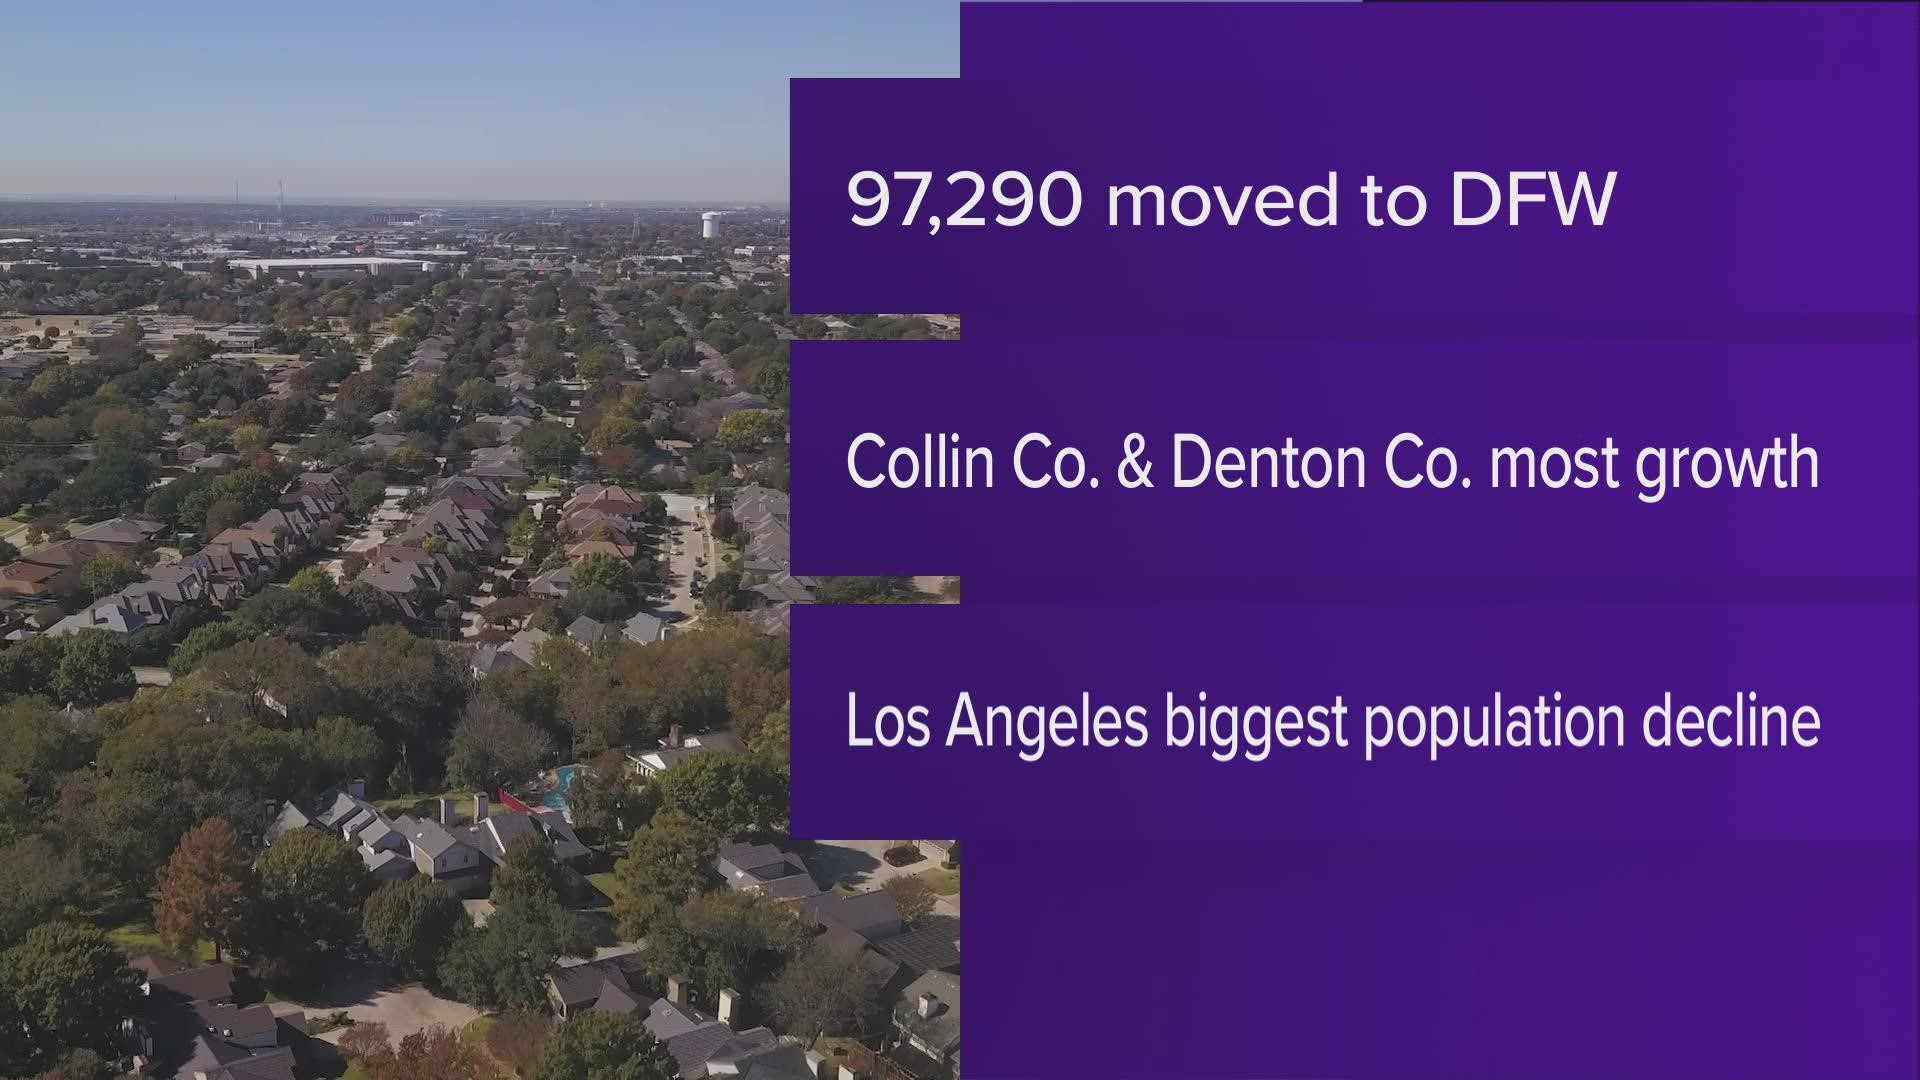 New U.S. census numbers released Thursday show that nearly 98,000 people moved to the Dallas Fort Worth area in 2021. Collin and Denton Counties saw the most growth.